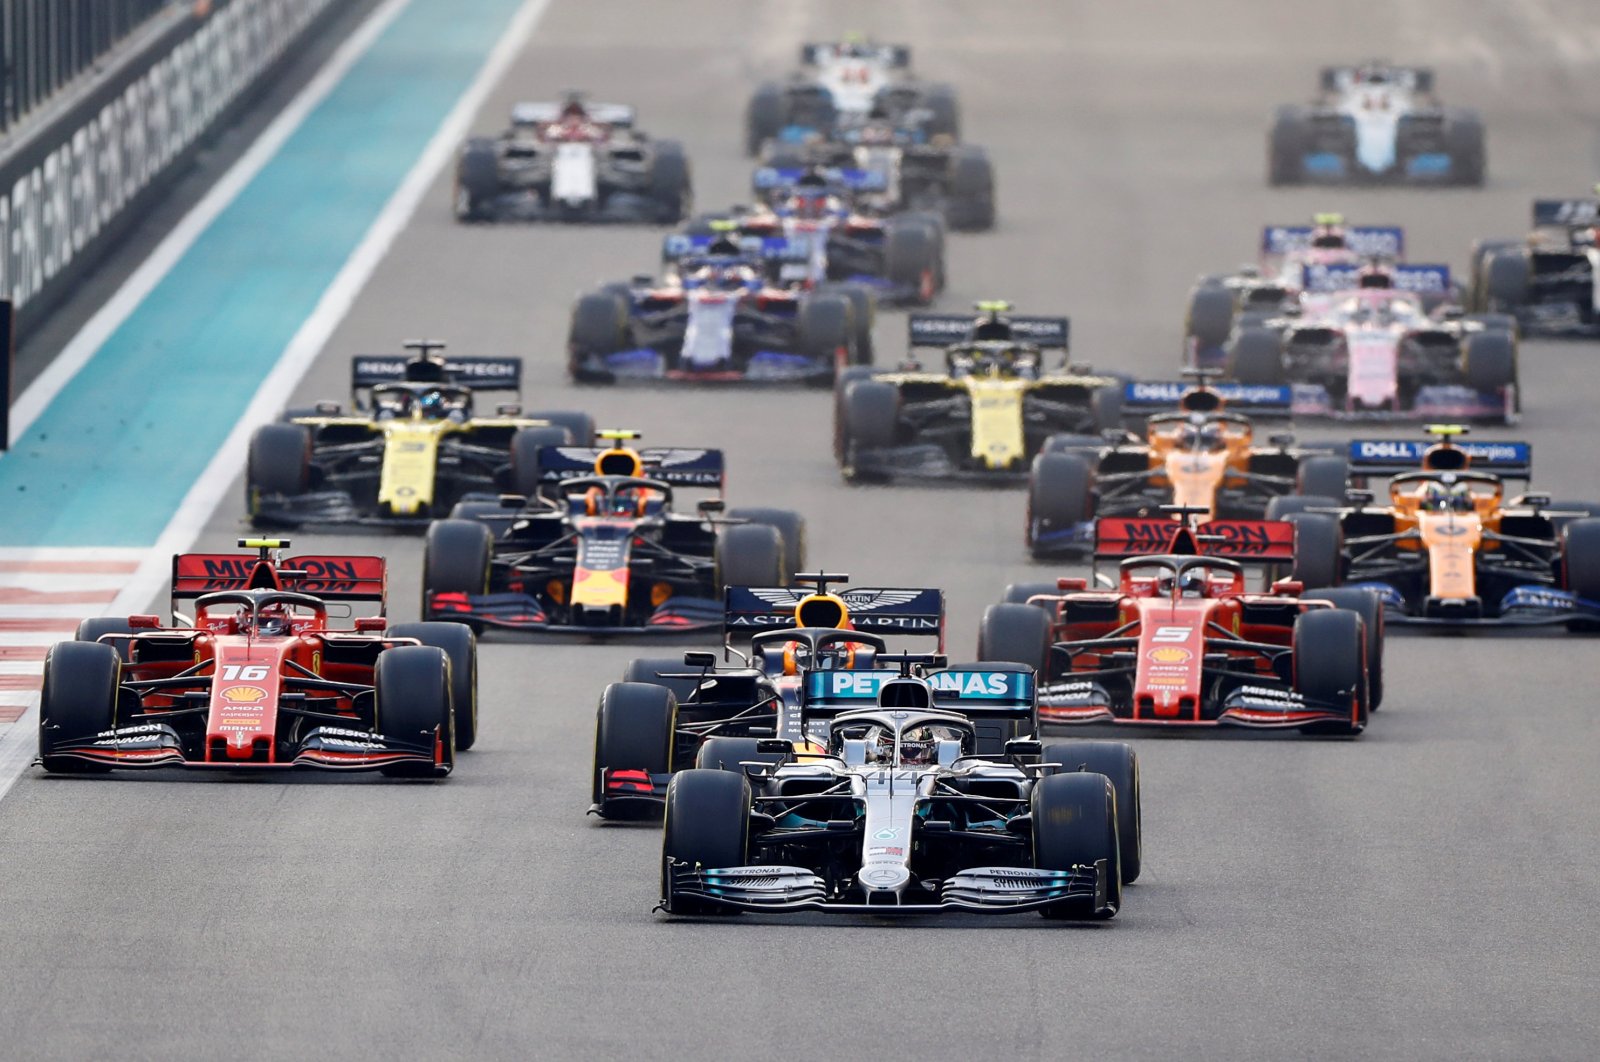 Mercedes' Lewis Hamilton leads at the start of the race in Abu Dhabi, United Arab Emirates, Dec. 1, 2019. (REUTERS Photo)